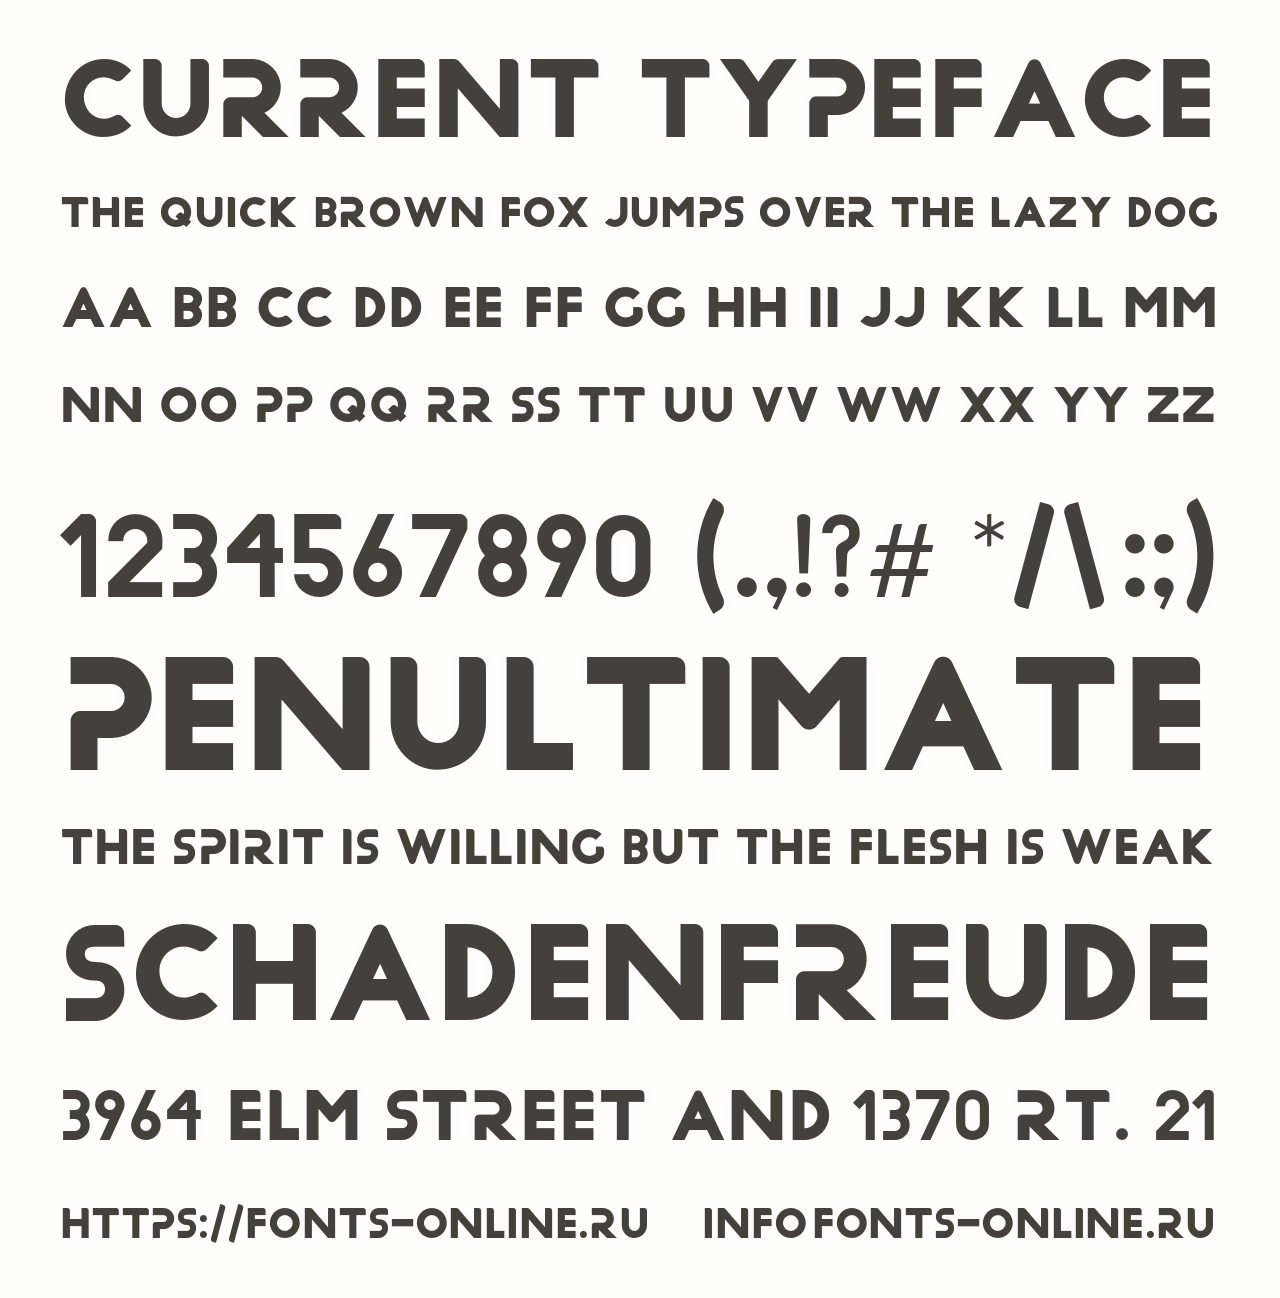 Шрифт Current Typeface